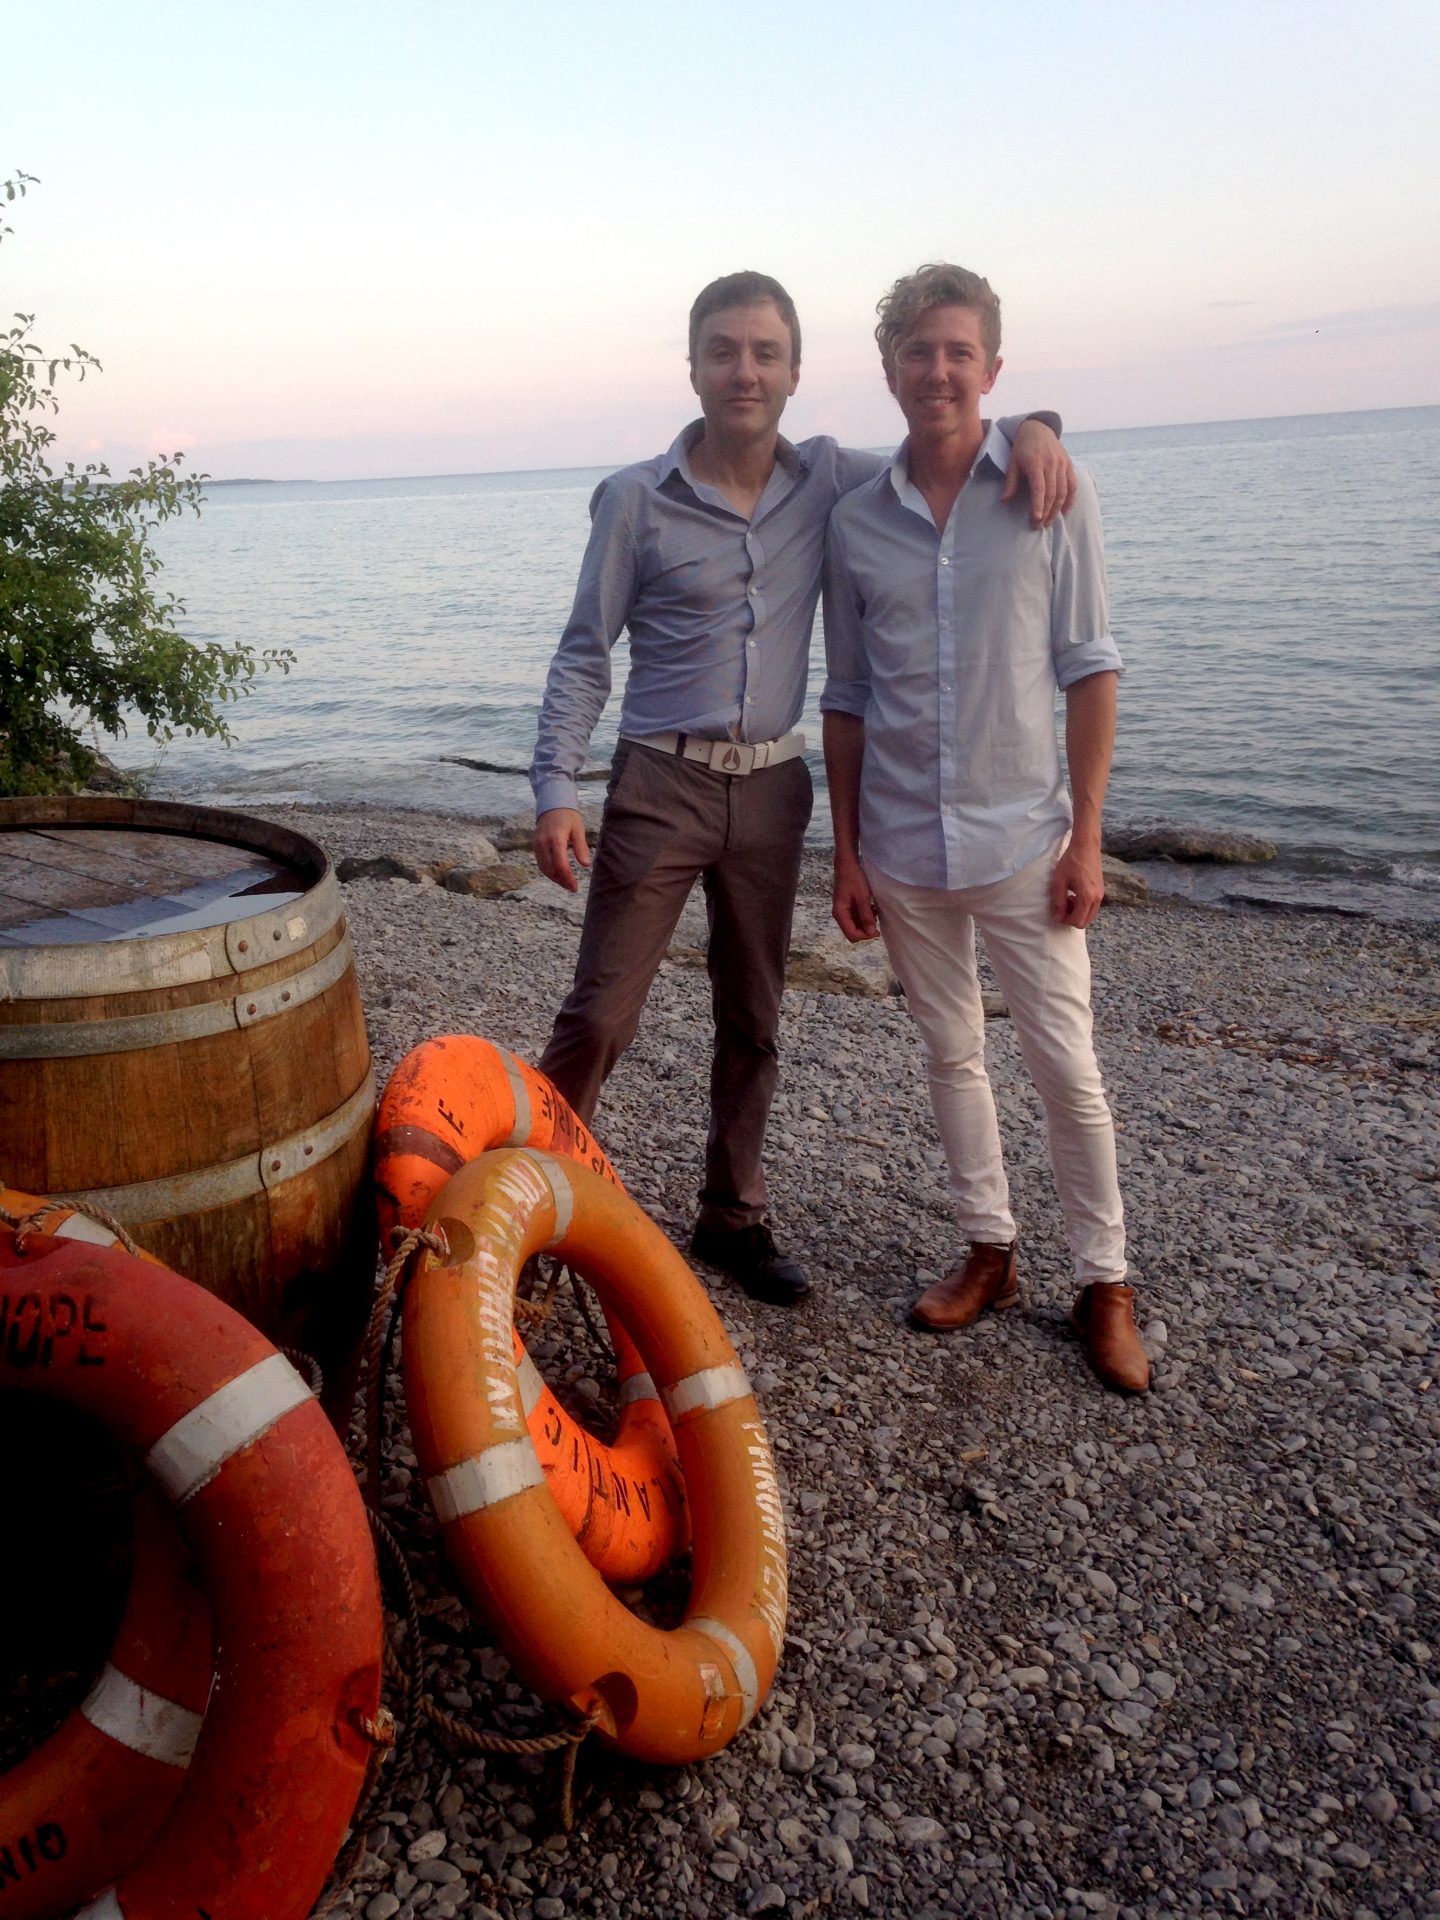 Winemaker Bruno Francois and partner Jens Korberg take a break from making some great wine (and cider) at The Old Third, Prince Edward County.